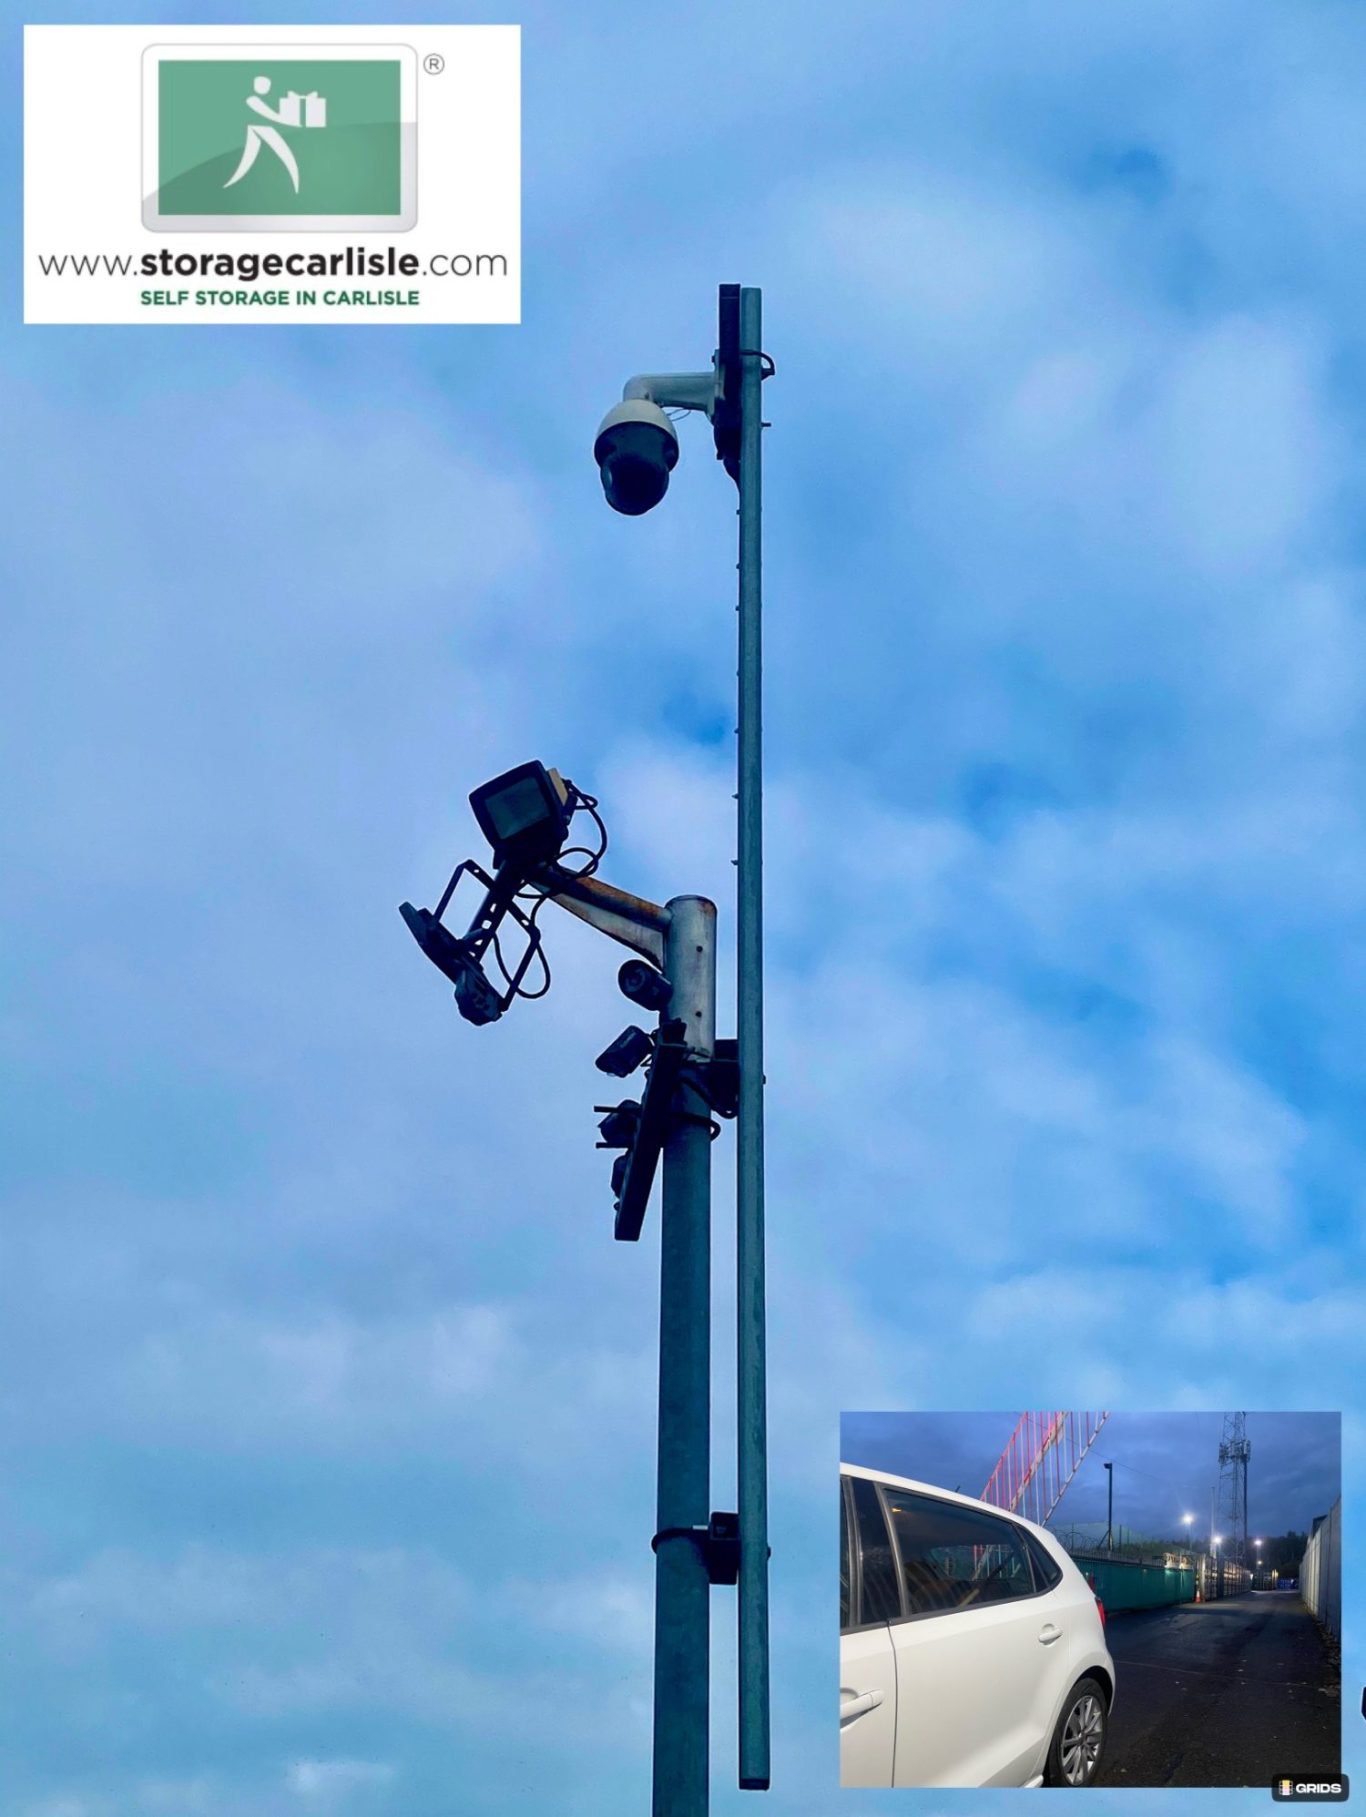 lighting and cctv on a pole at storage facility